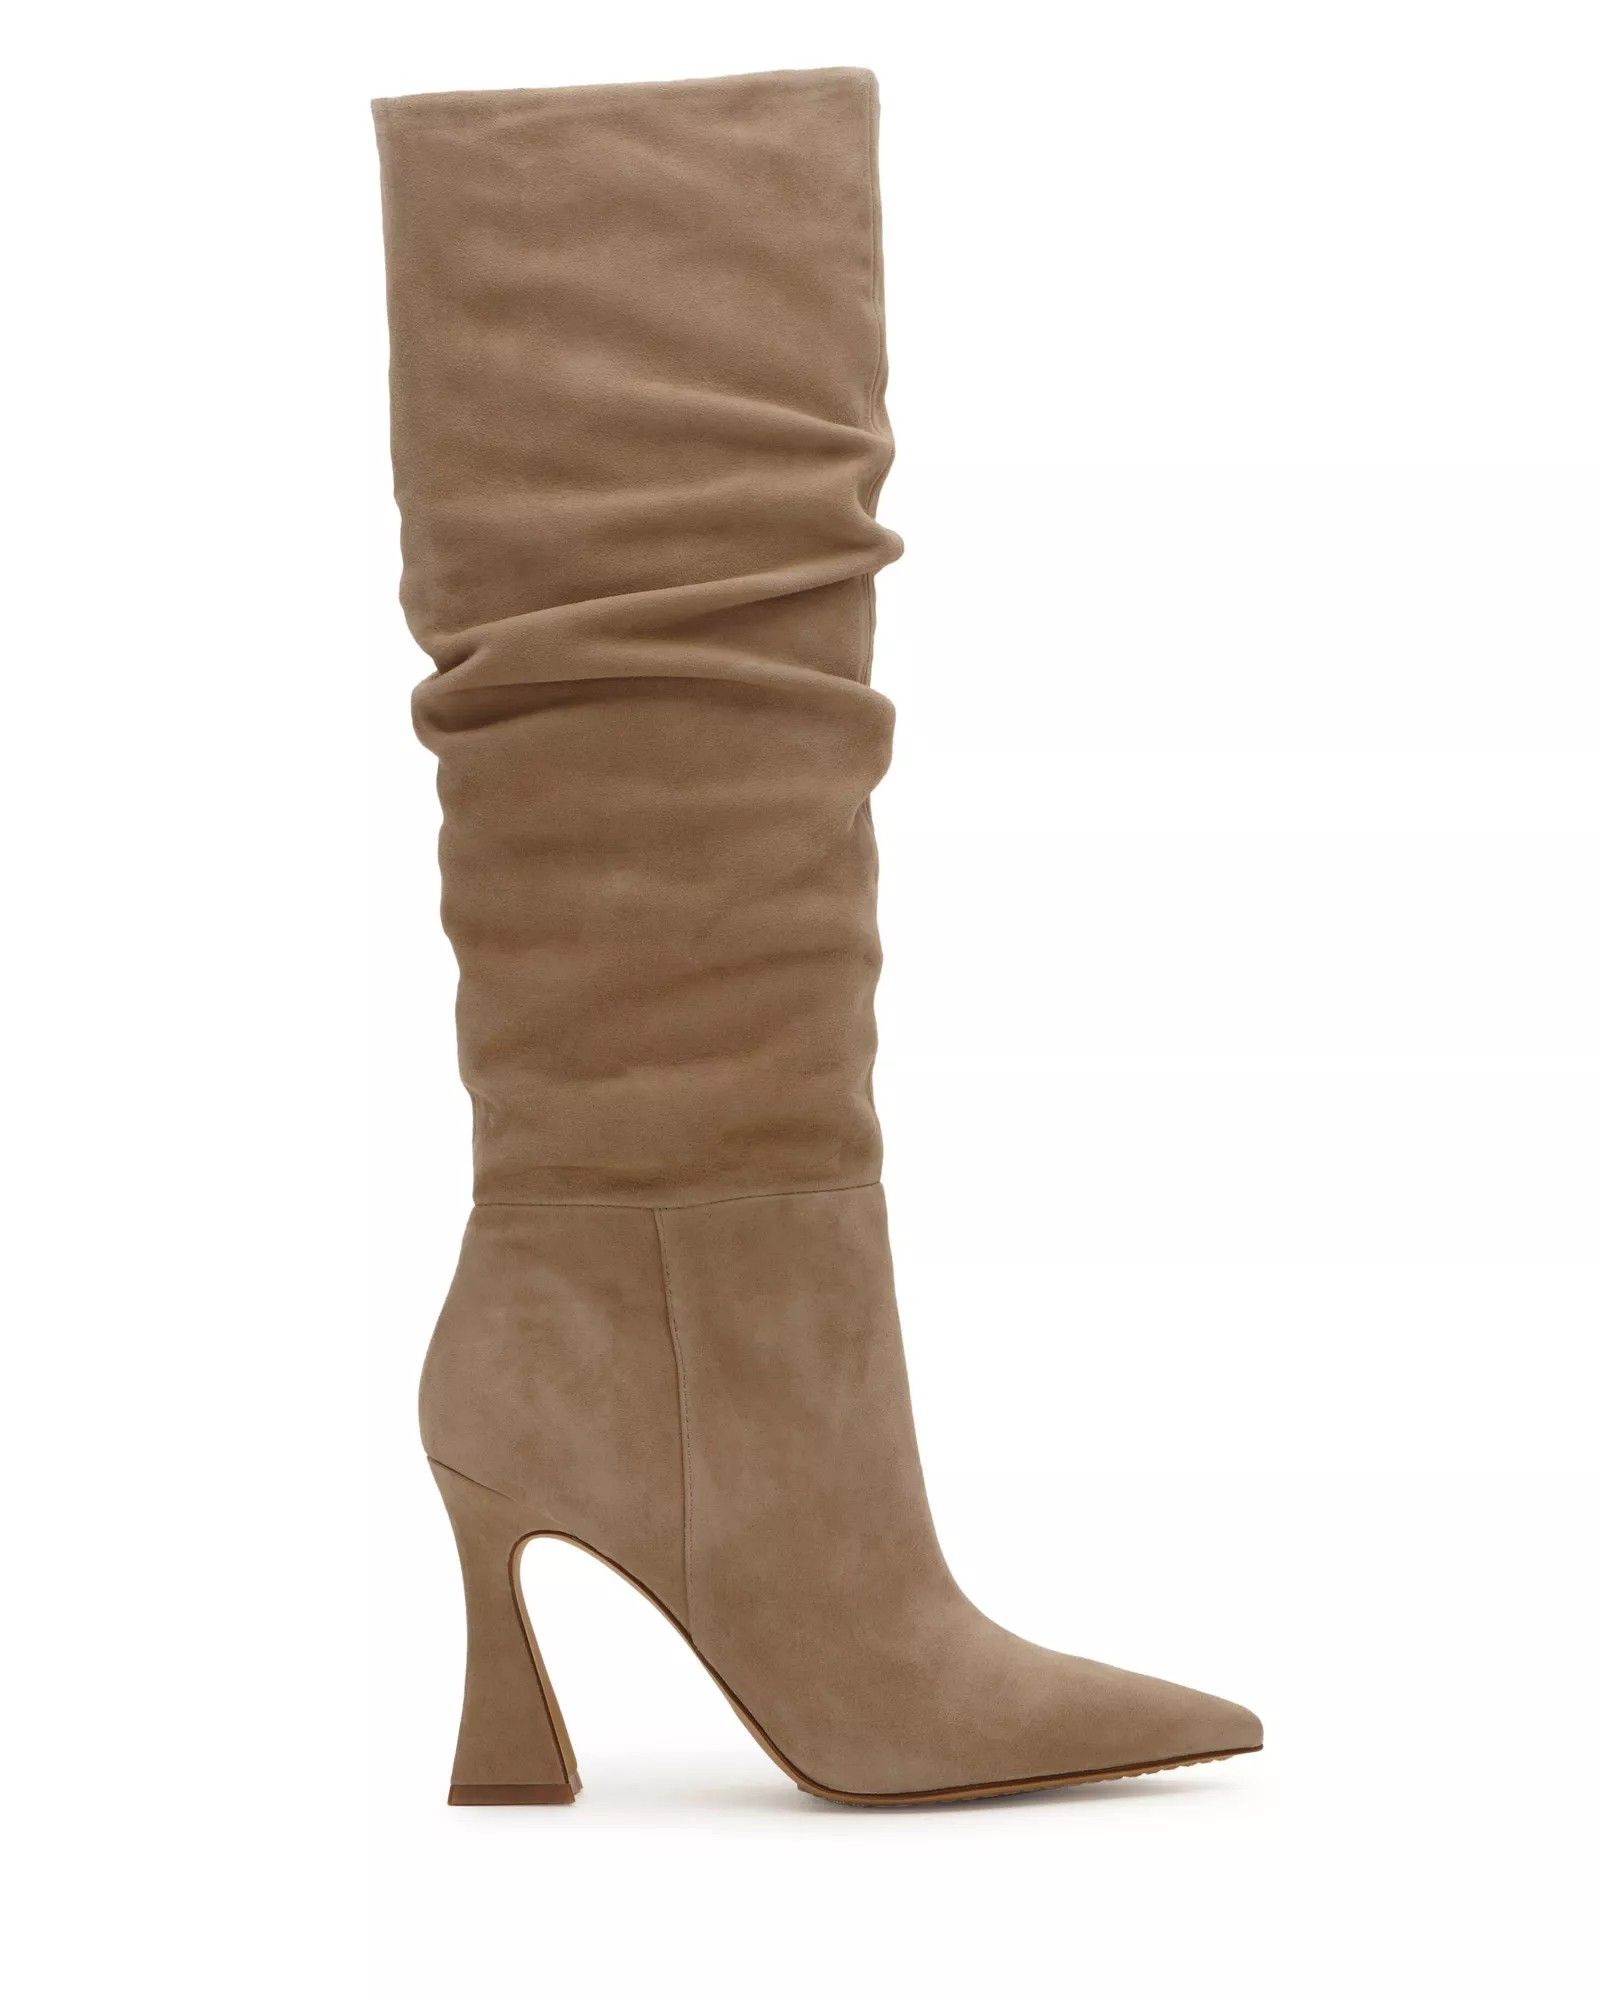 Vince Camuto Alinkay Boot | Vince Camuto